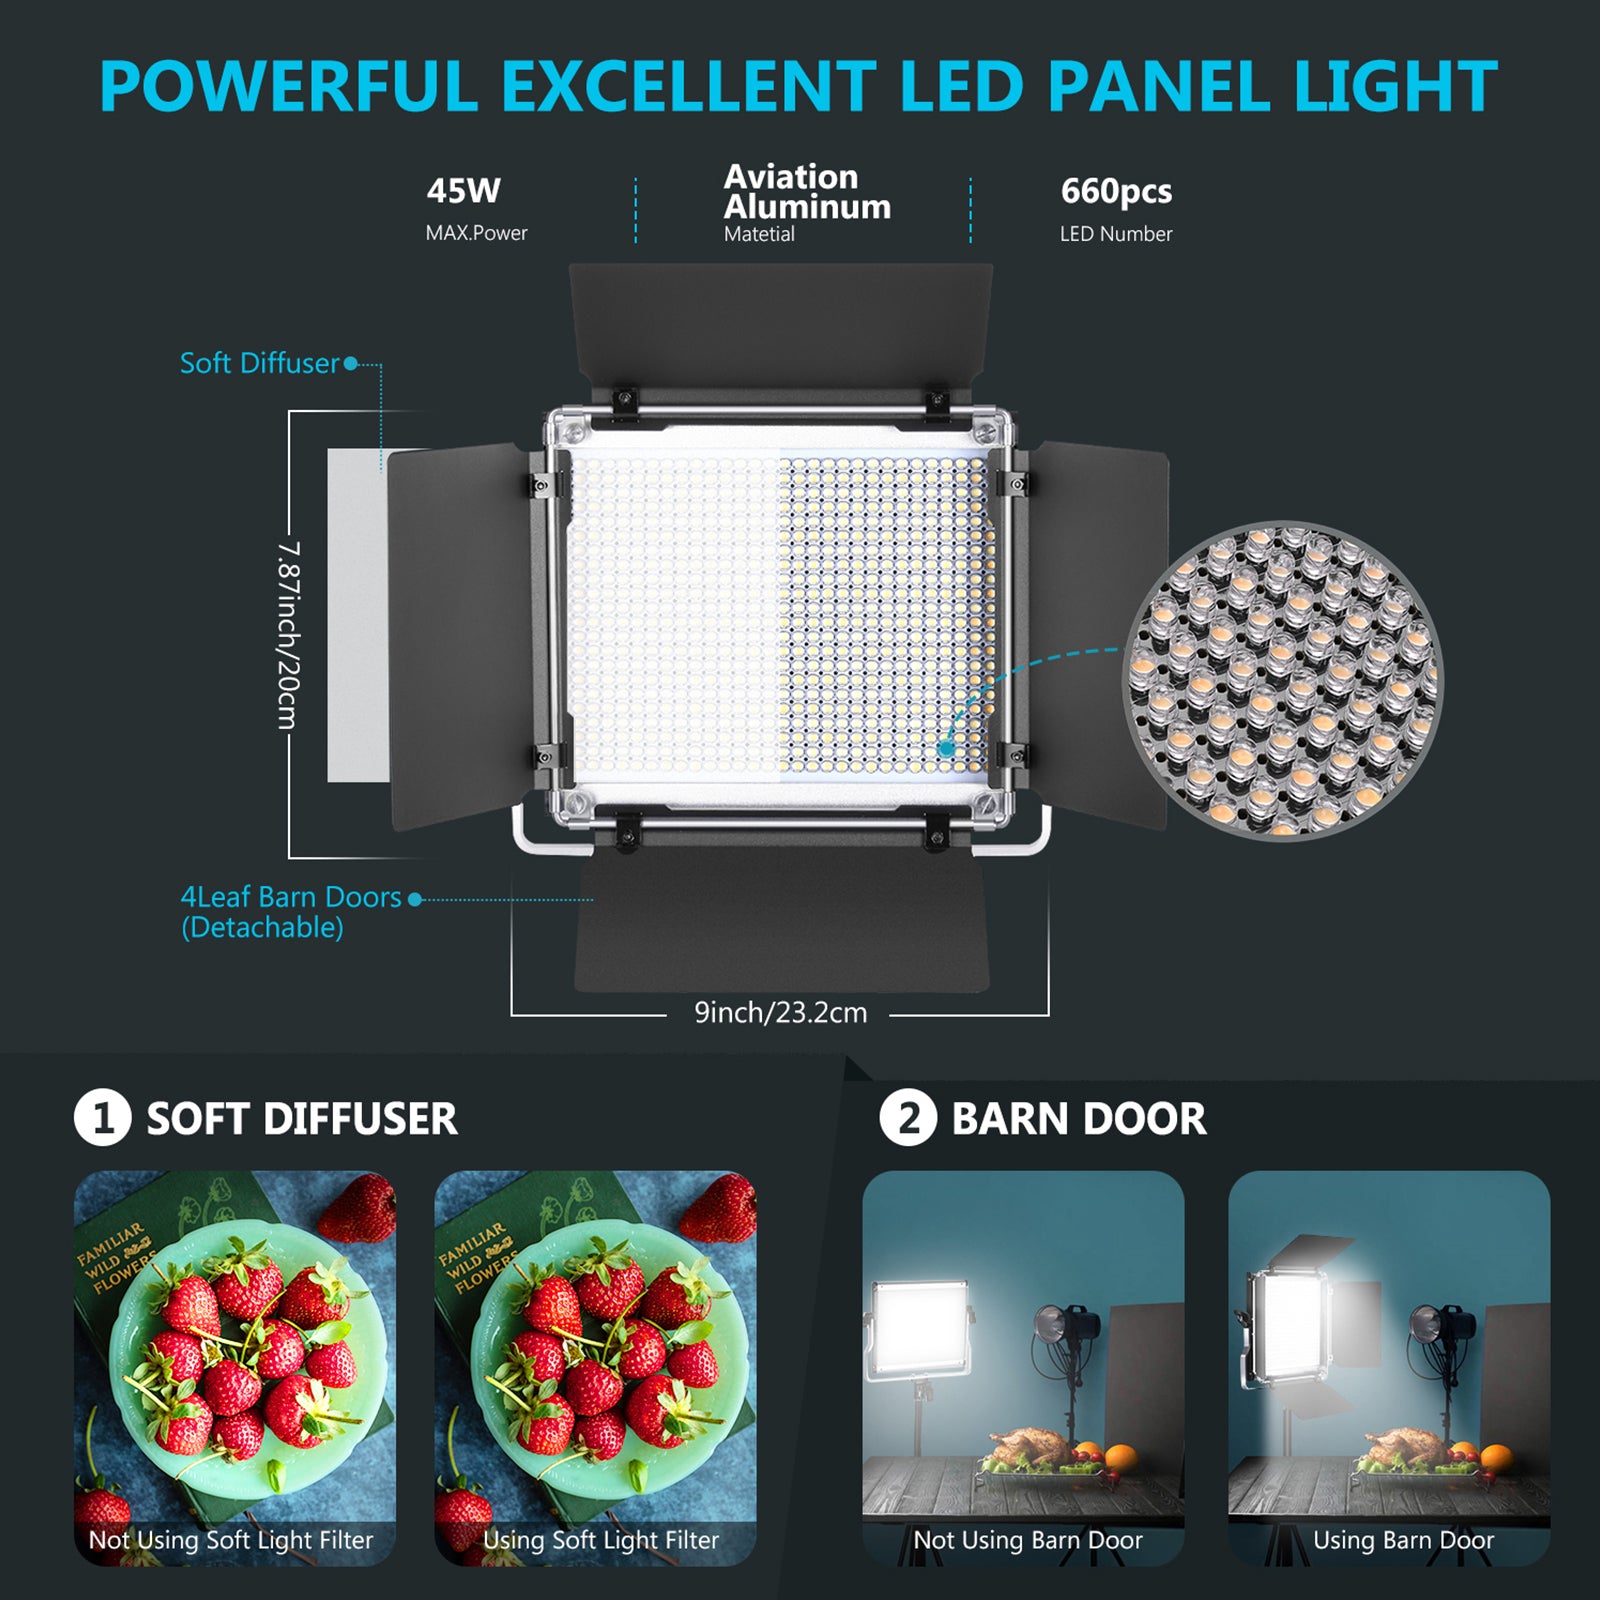 Neewer Professional Metal Bi-Color LED Video Light for Studio, ,  Product Photography, Video Shooting, Durable Metal Frame, Dimmable 660  Beads, with U Bracket and Barndoor, 3200-5600K, CRI 96+